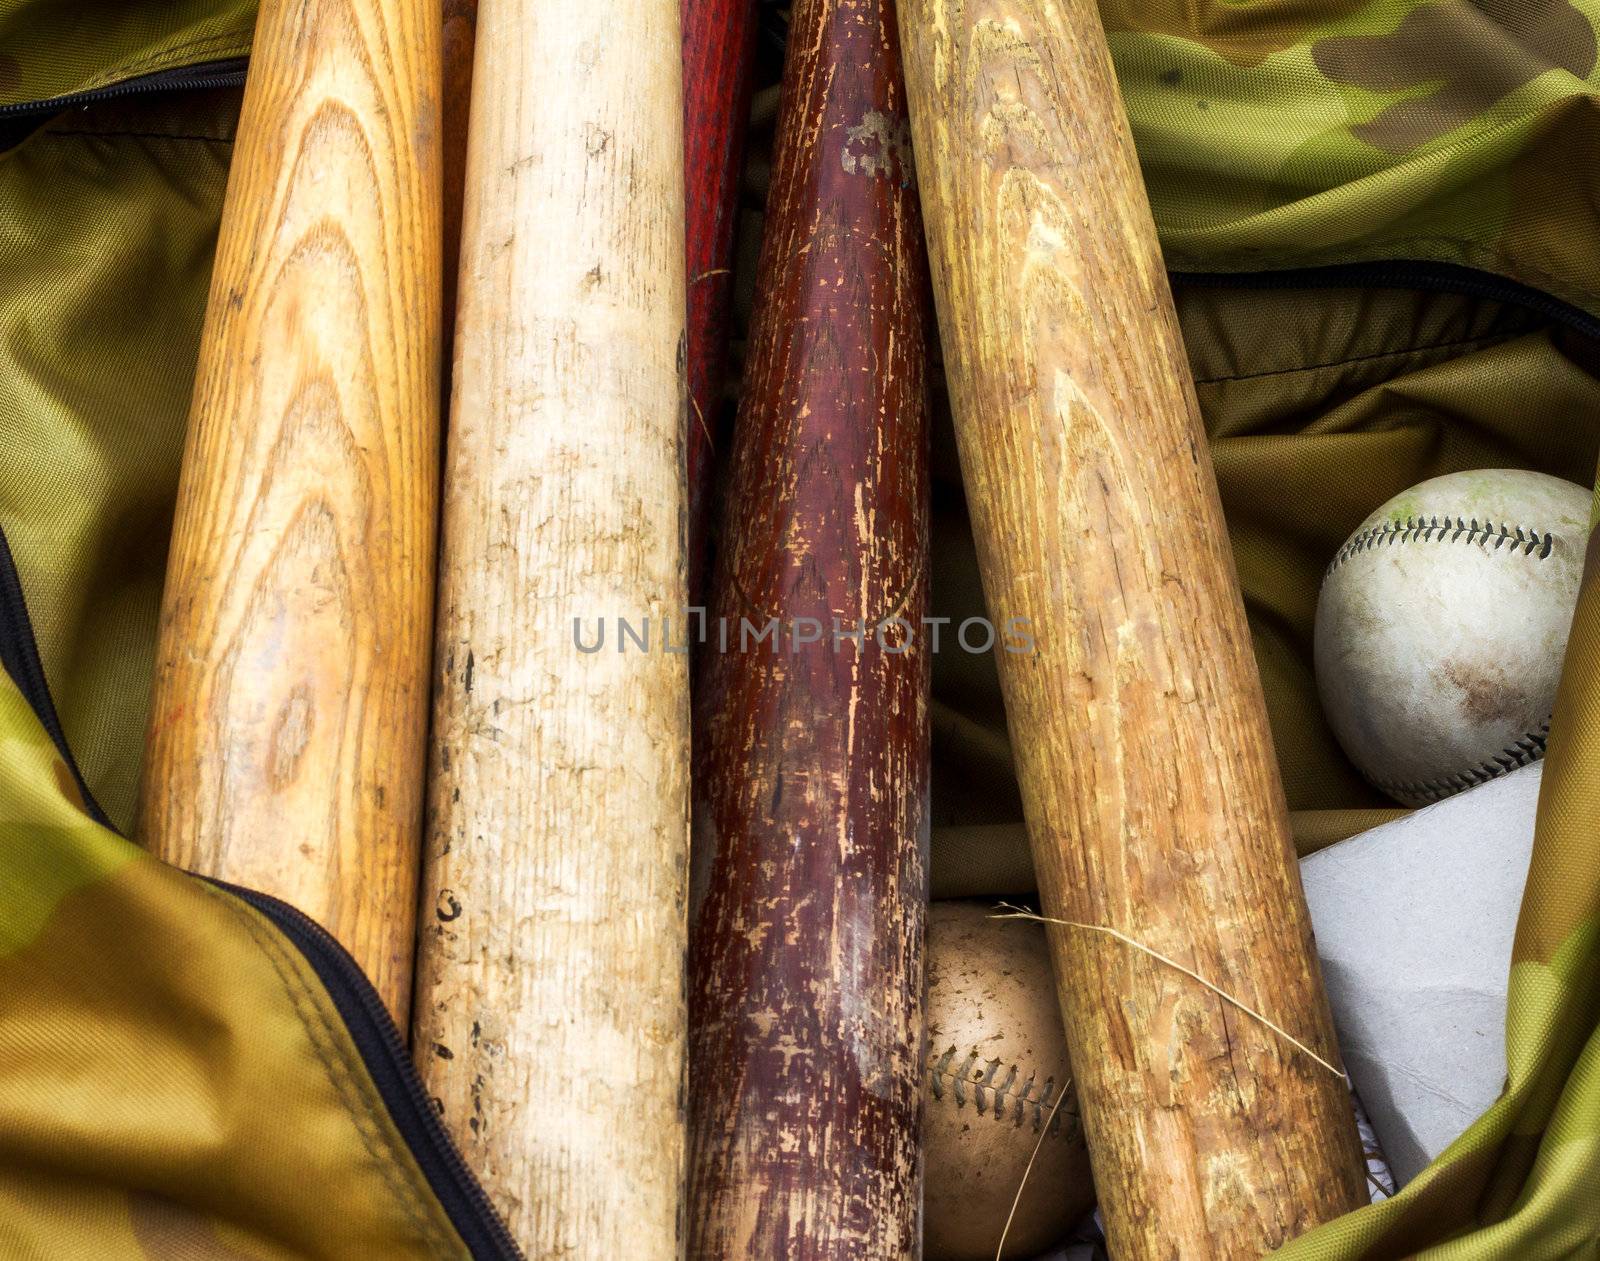 Bats and softballs in a player's equipment bag.